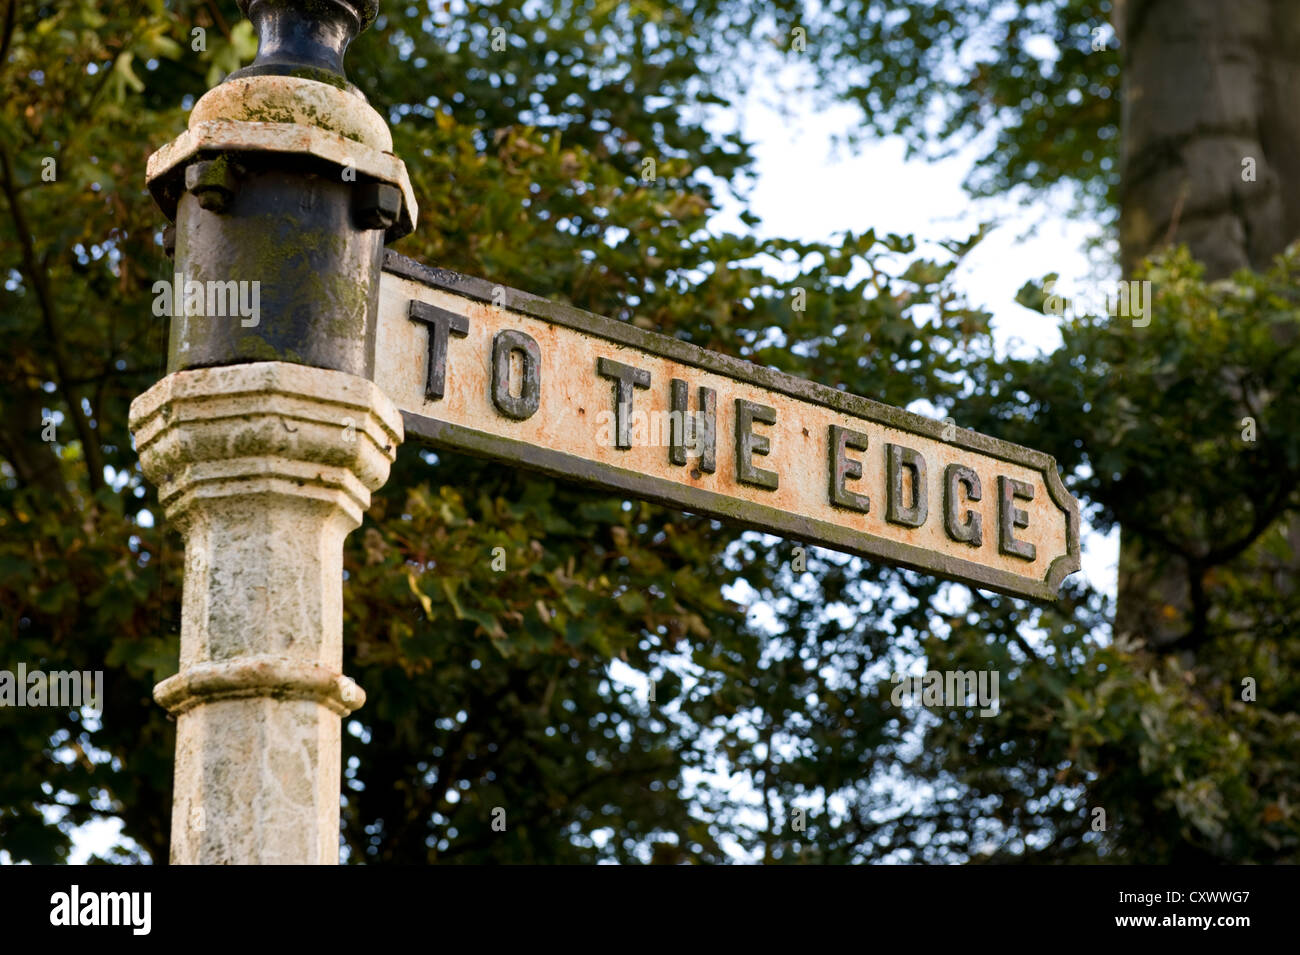 vintage metal roadside signpost at Alderley Edge near stormy point reads 'to the edge' Stock Photo